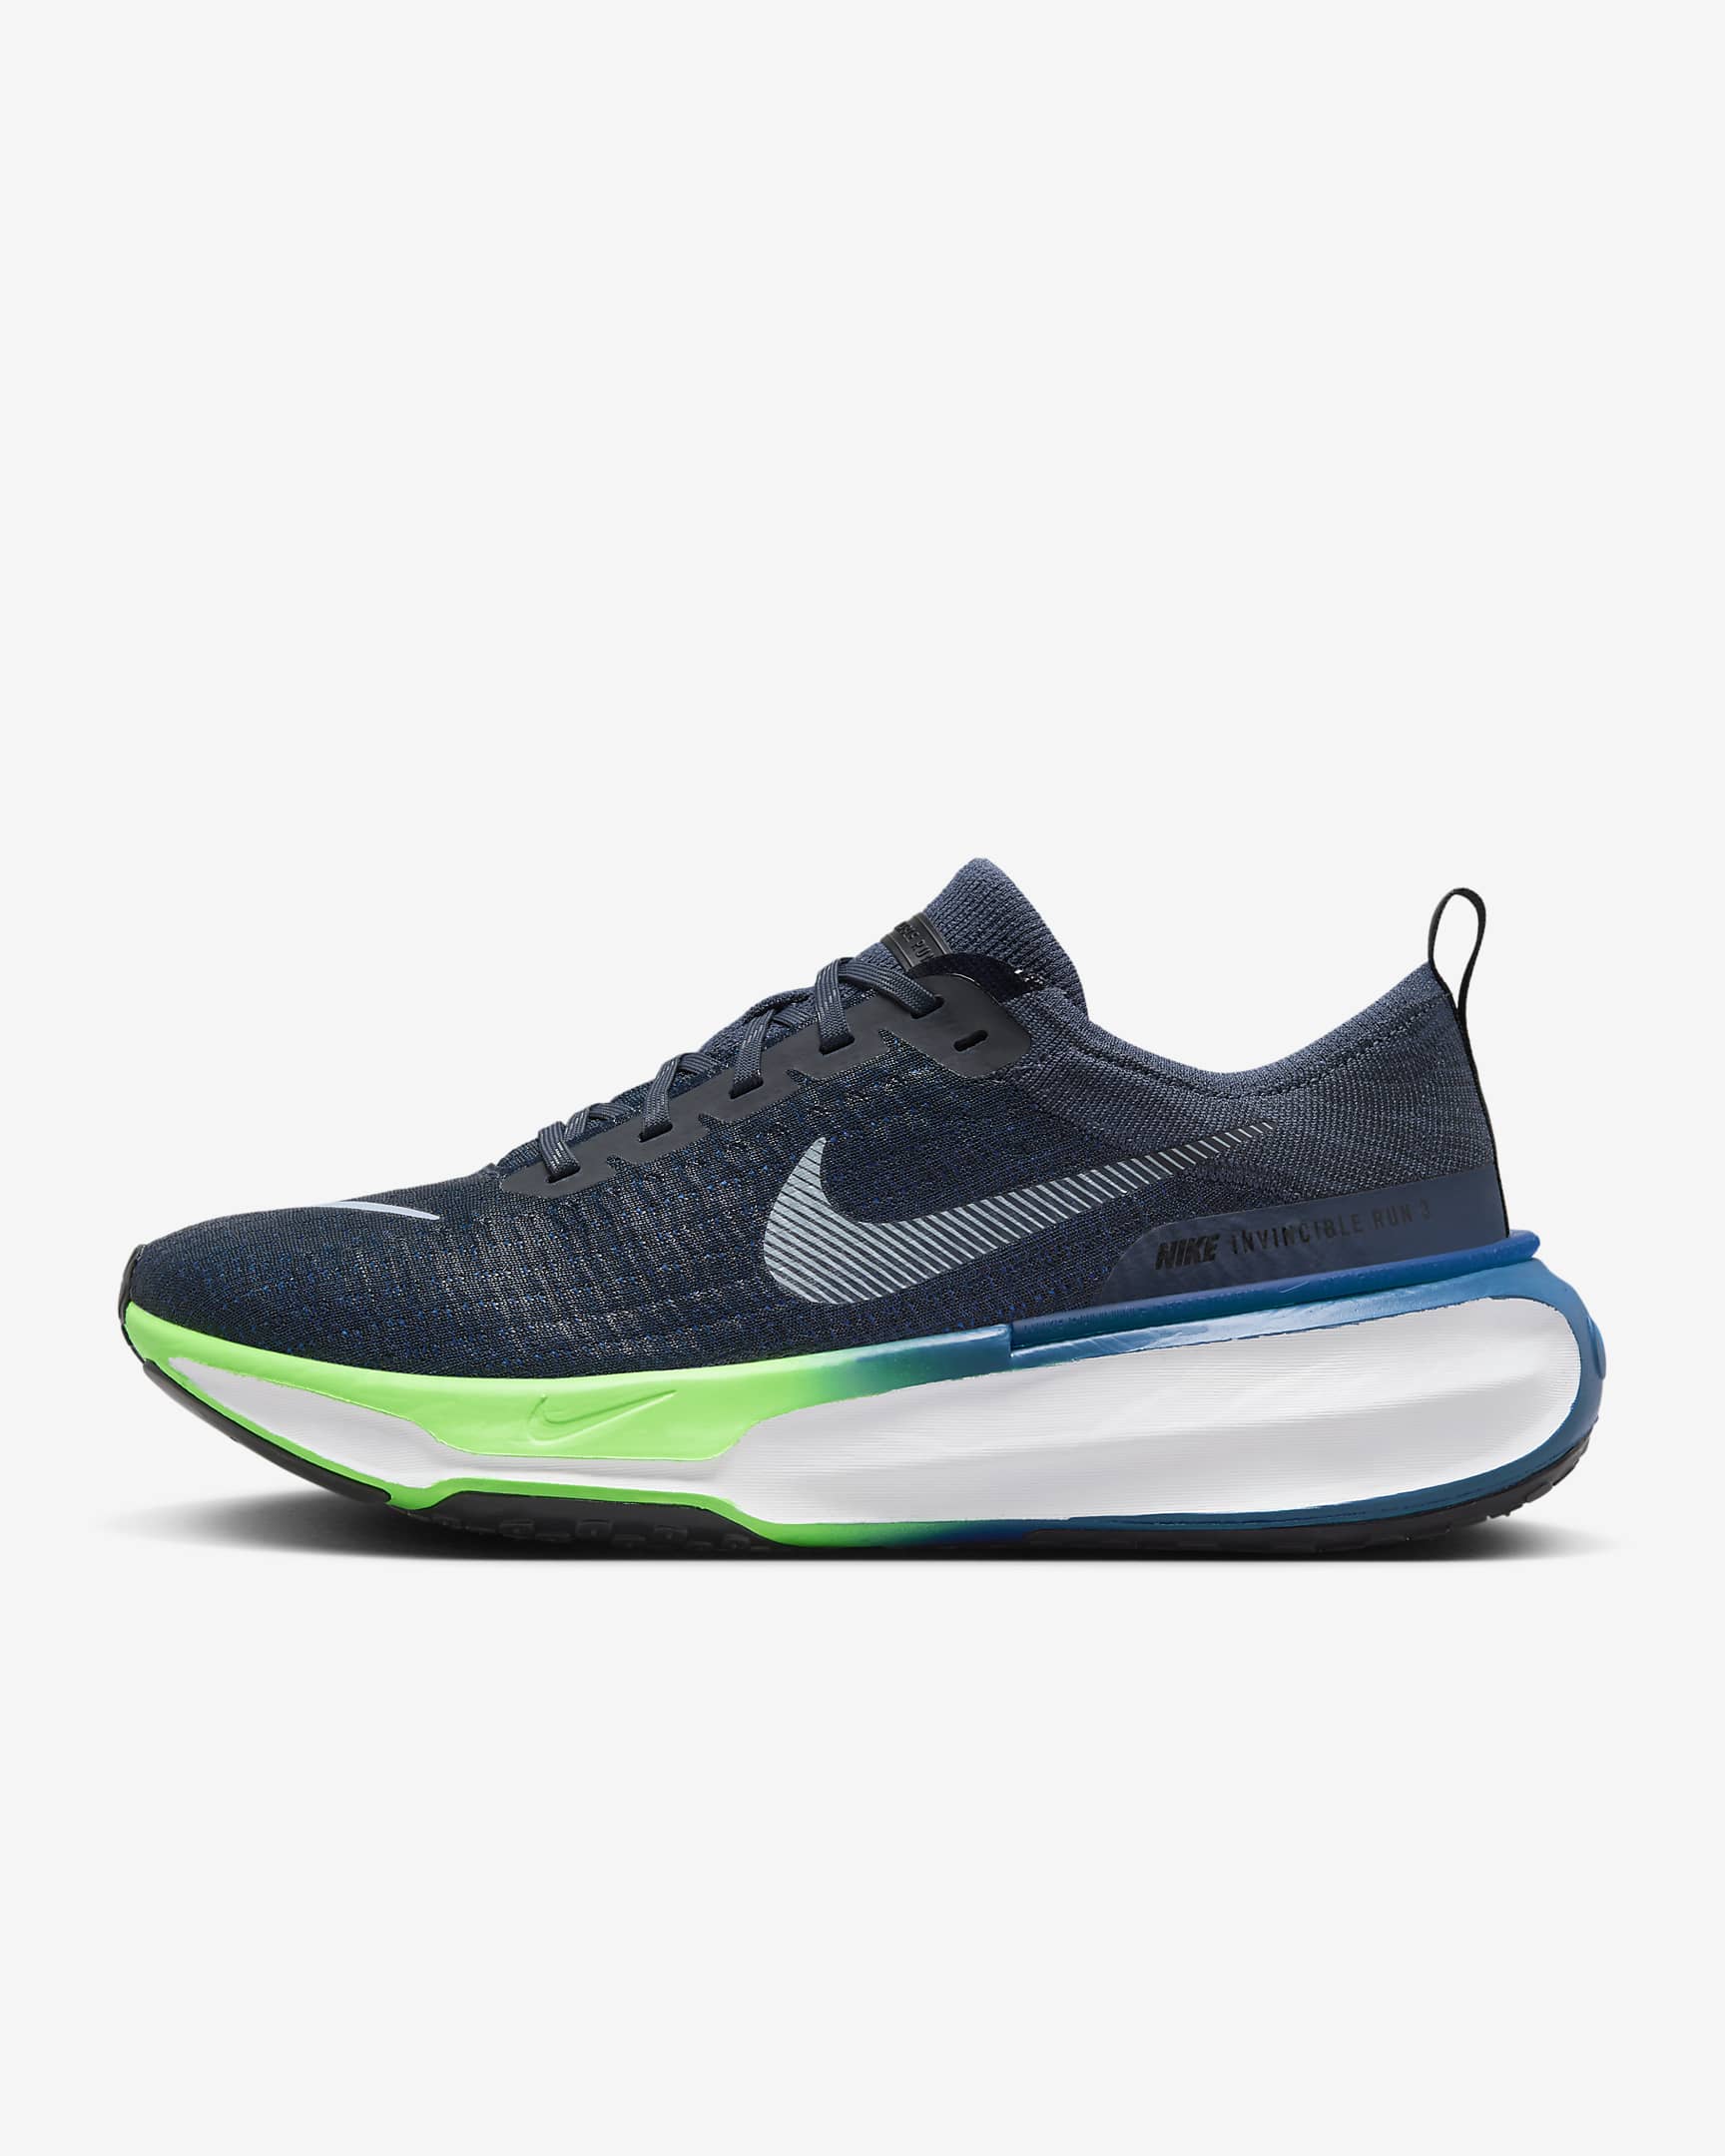 Nike Invincible 3 Men's Road Running Shoes. Nike IL